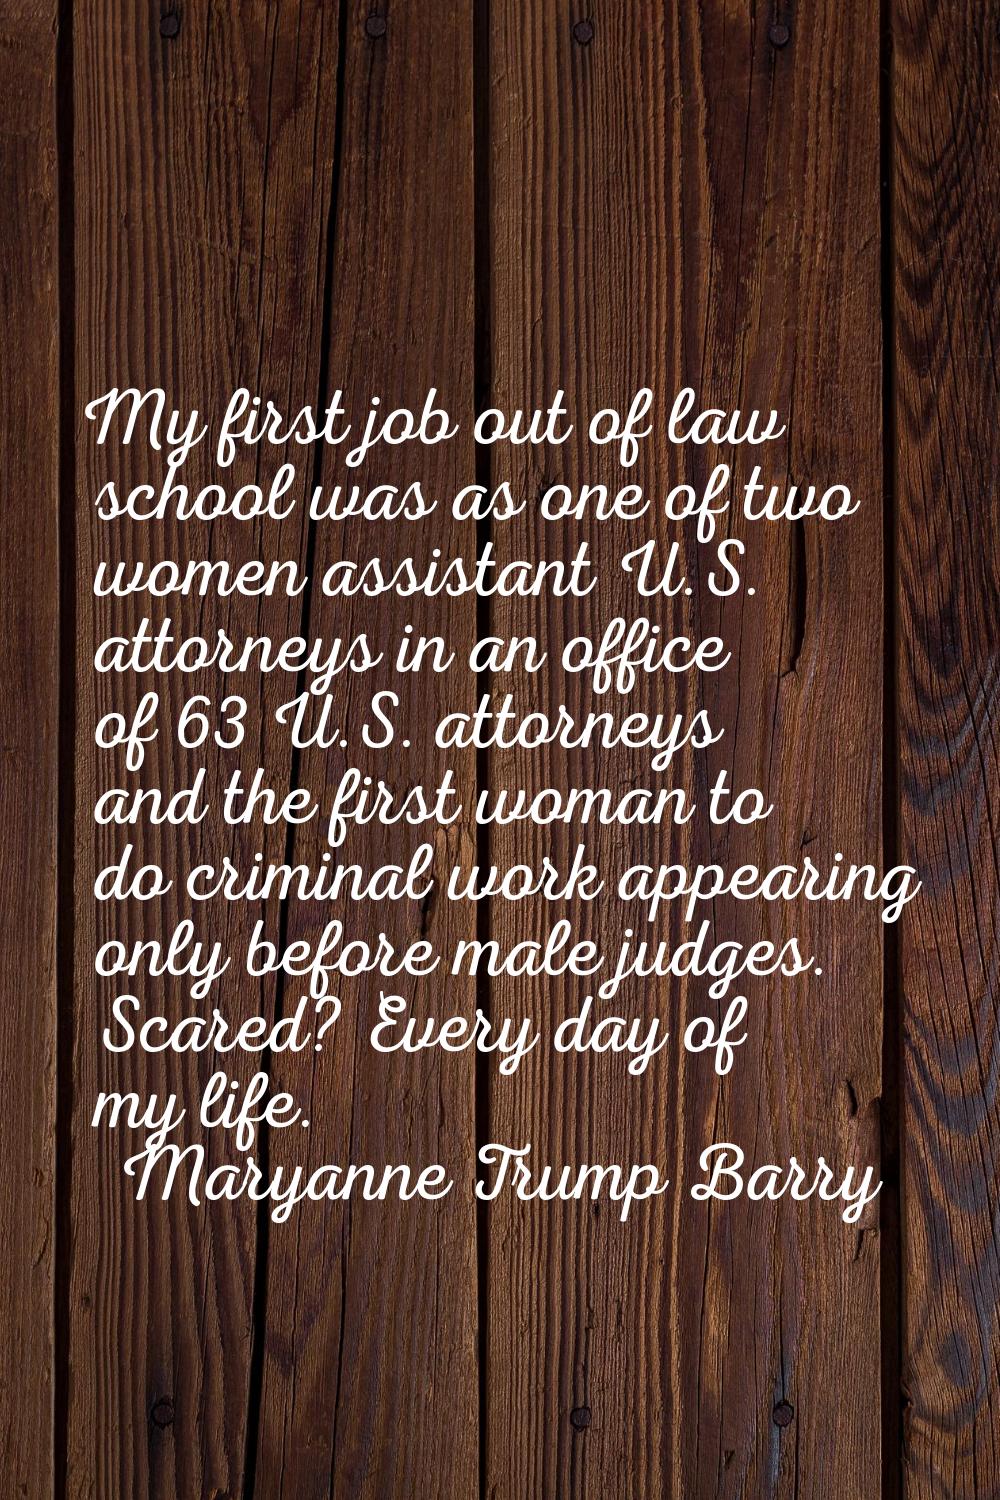 My first job out of law school was as one of two women assistant U.S. attorneys in an office of 63 